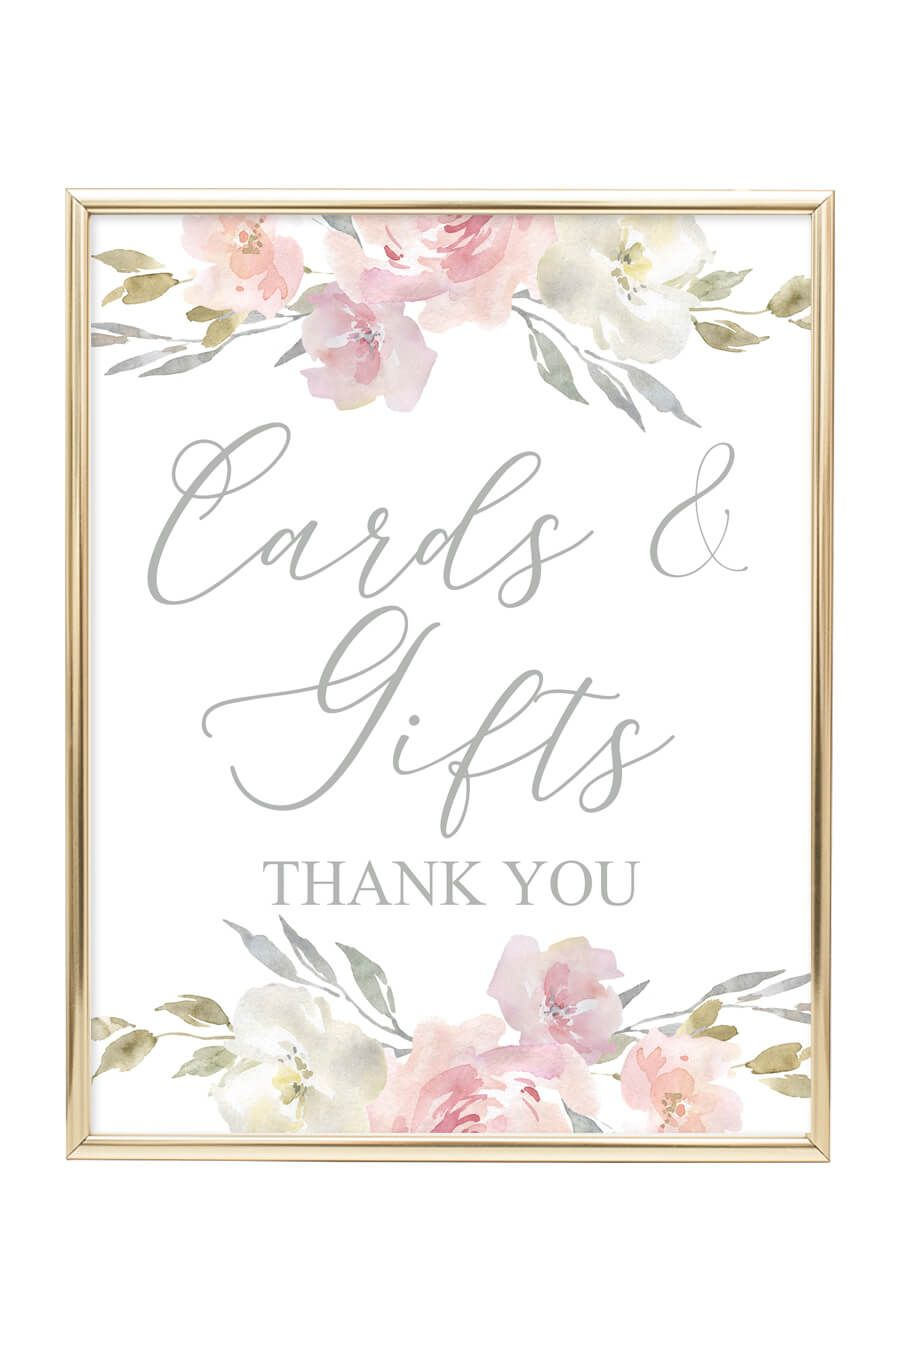 Free Printables - Download Over 700 Free Printable Files - Cards Sign Free Printable